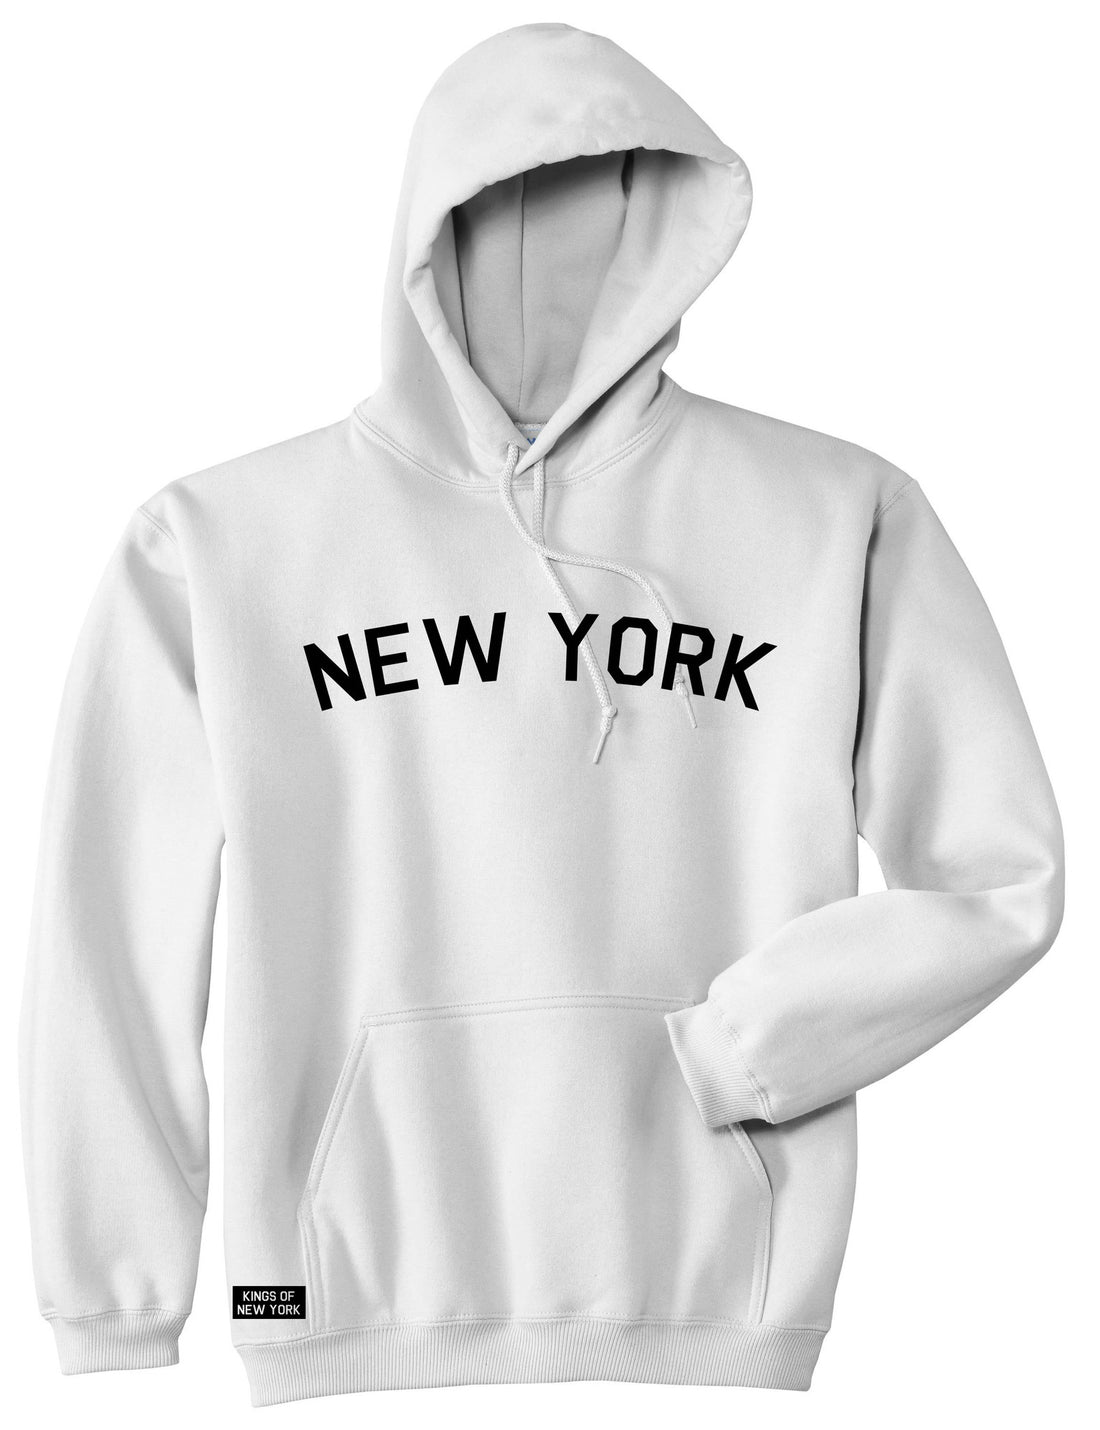 New York Arch Pullover Hoodie Hoody in White by Kings Of NY